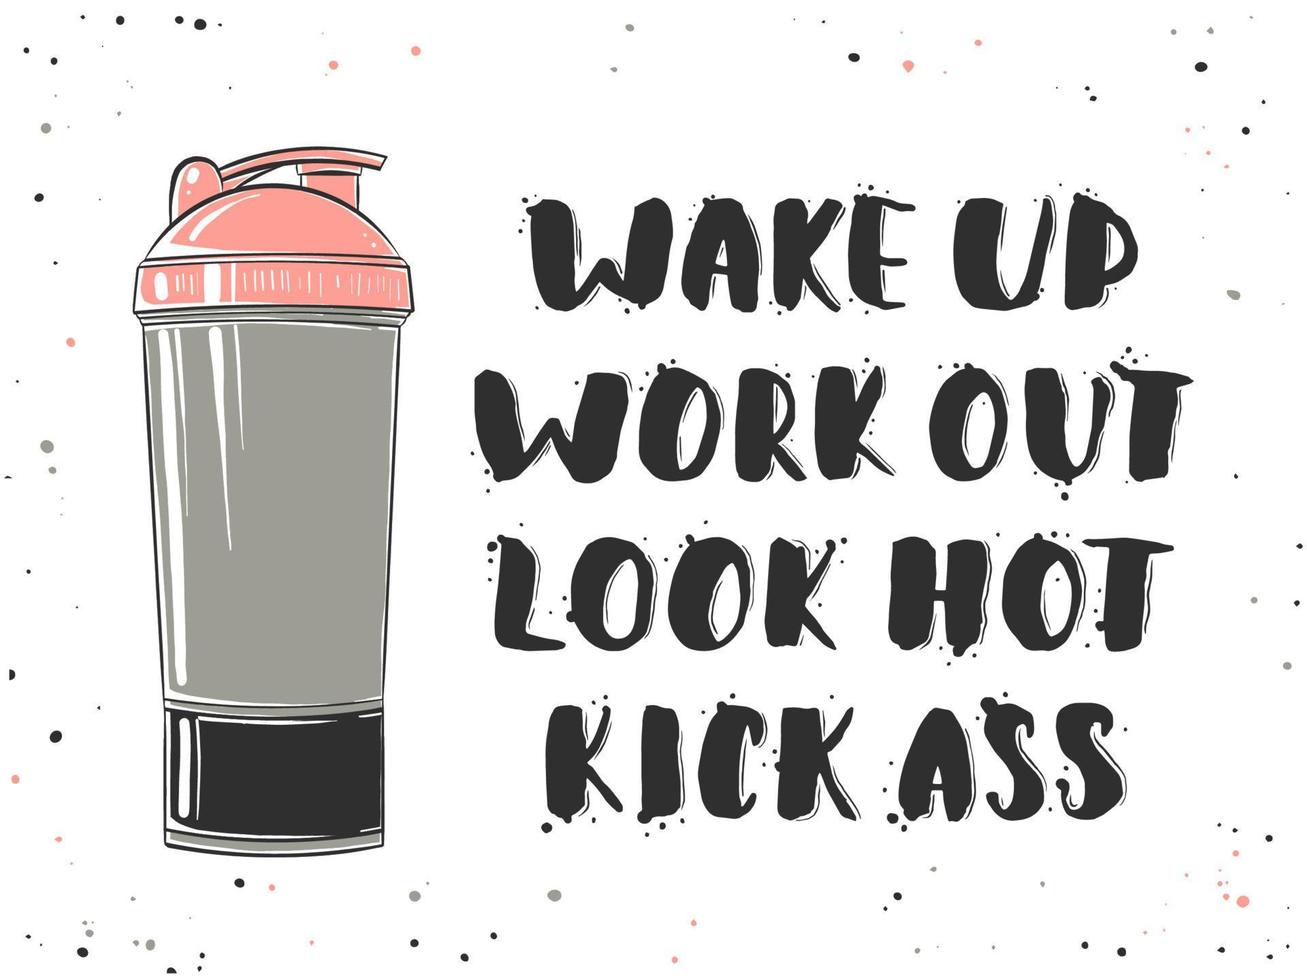 Vector hand drawn unique typography design element for greeting cards, decoration, prints and posters. Wake up, work out, look hot, kick ass with sketch of shaker. Handwritten lettering.